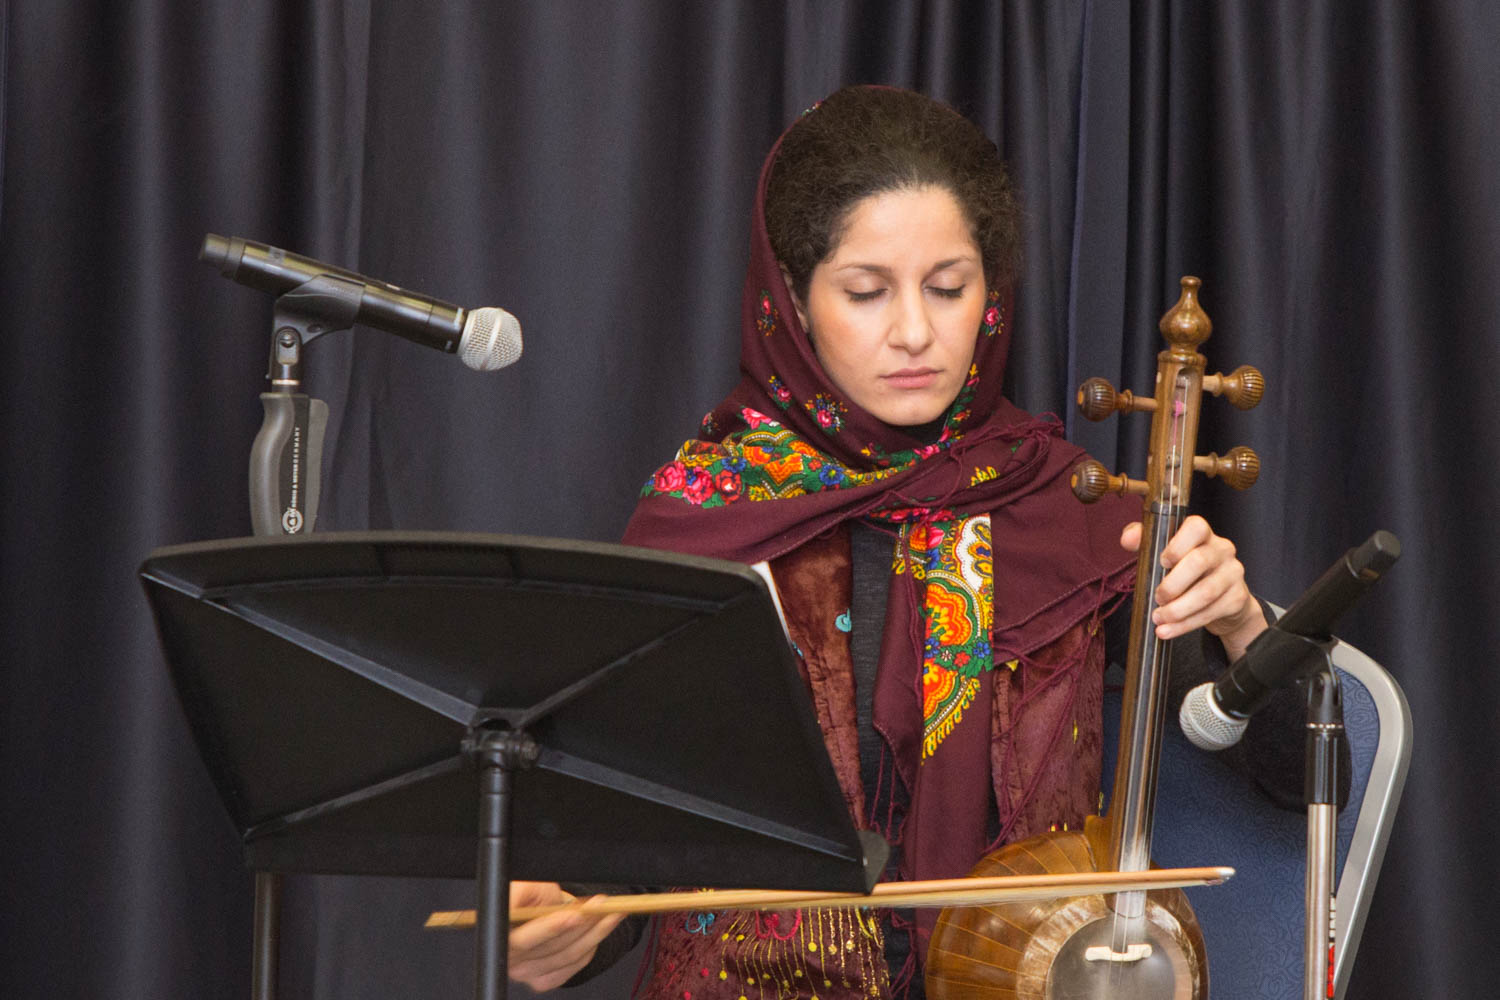 For the Interfaith Dinner's benediction, graduate student Rana Shieh combined Gregorian chant with Persian classical music. 